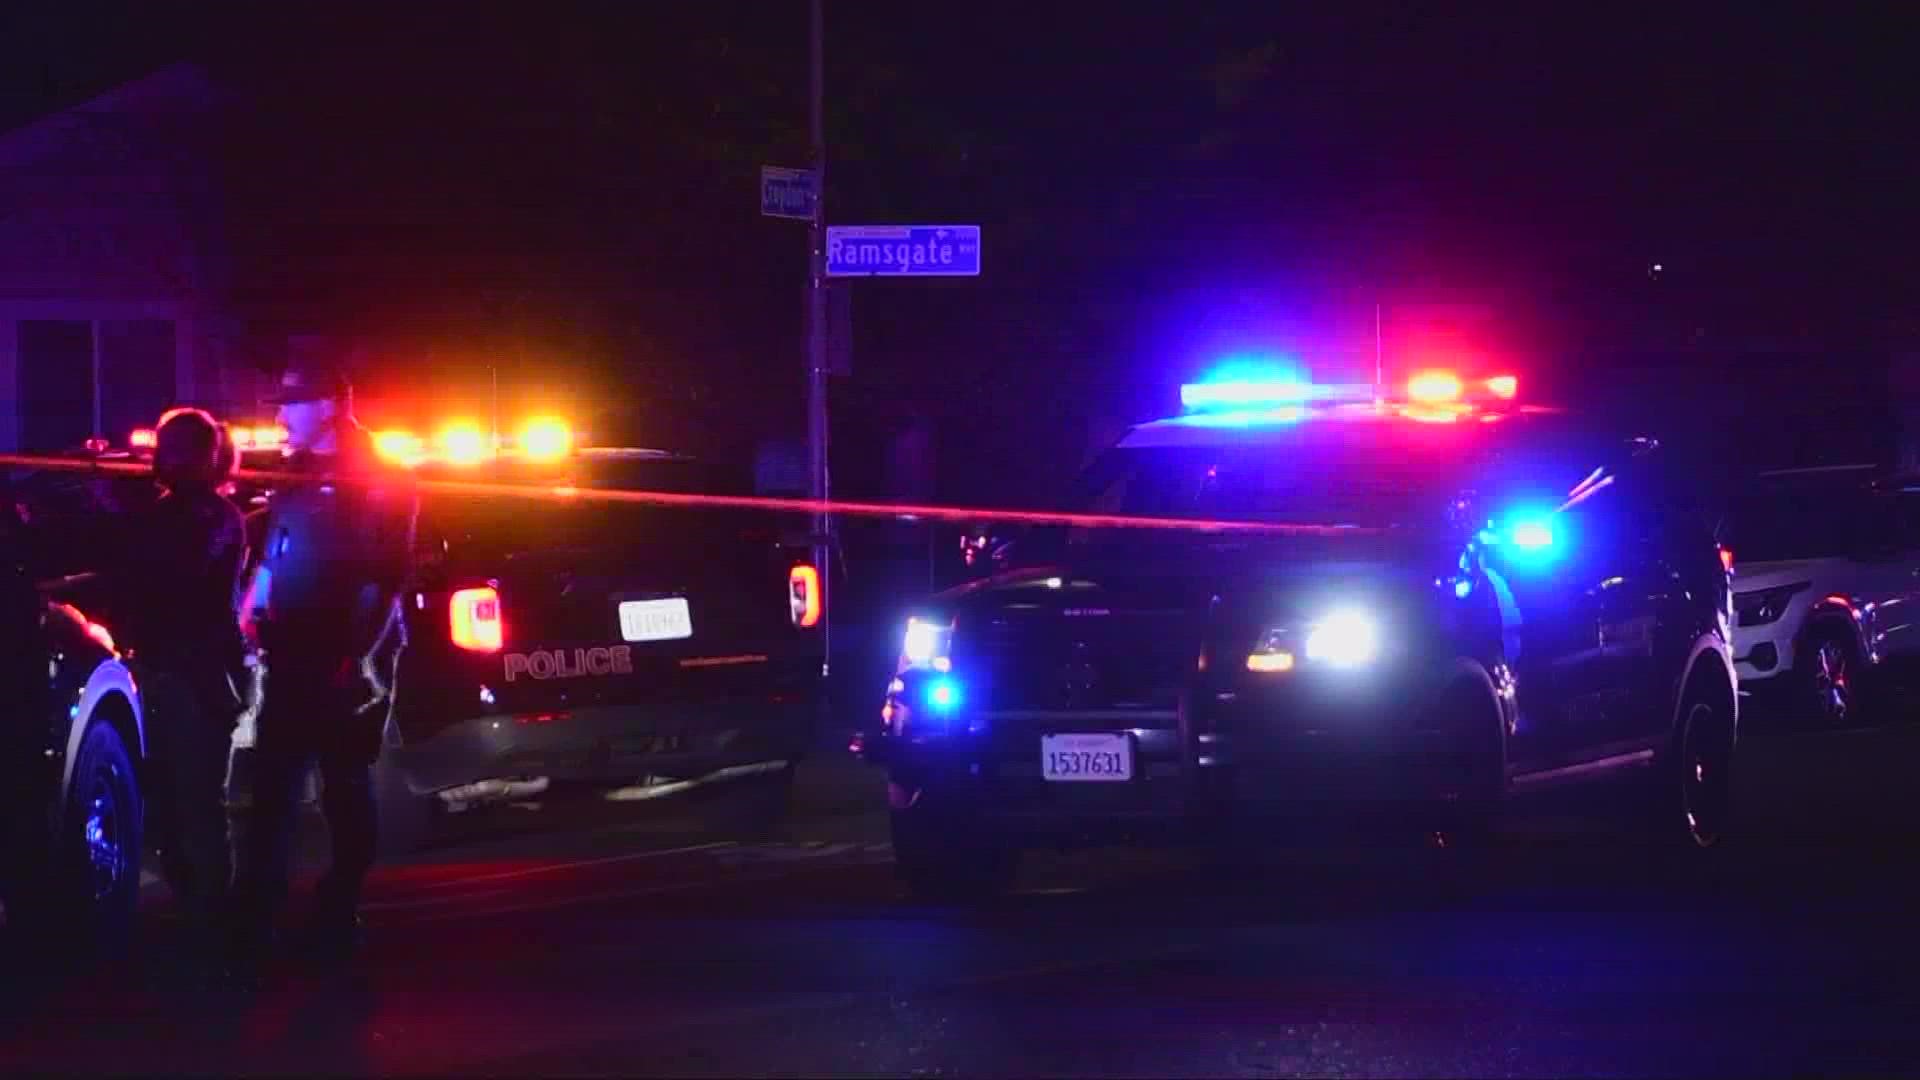 The deadly shooting happened Friday night in the 3000 block of Ramsgate Way in Rancho Cordova, according to Sacramento County Sheriff's deputies.